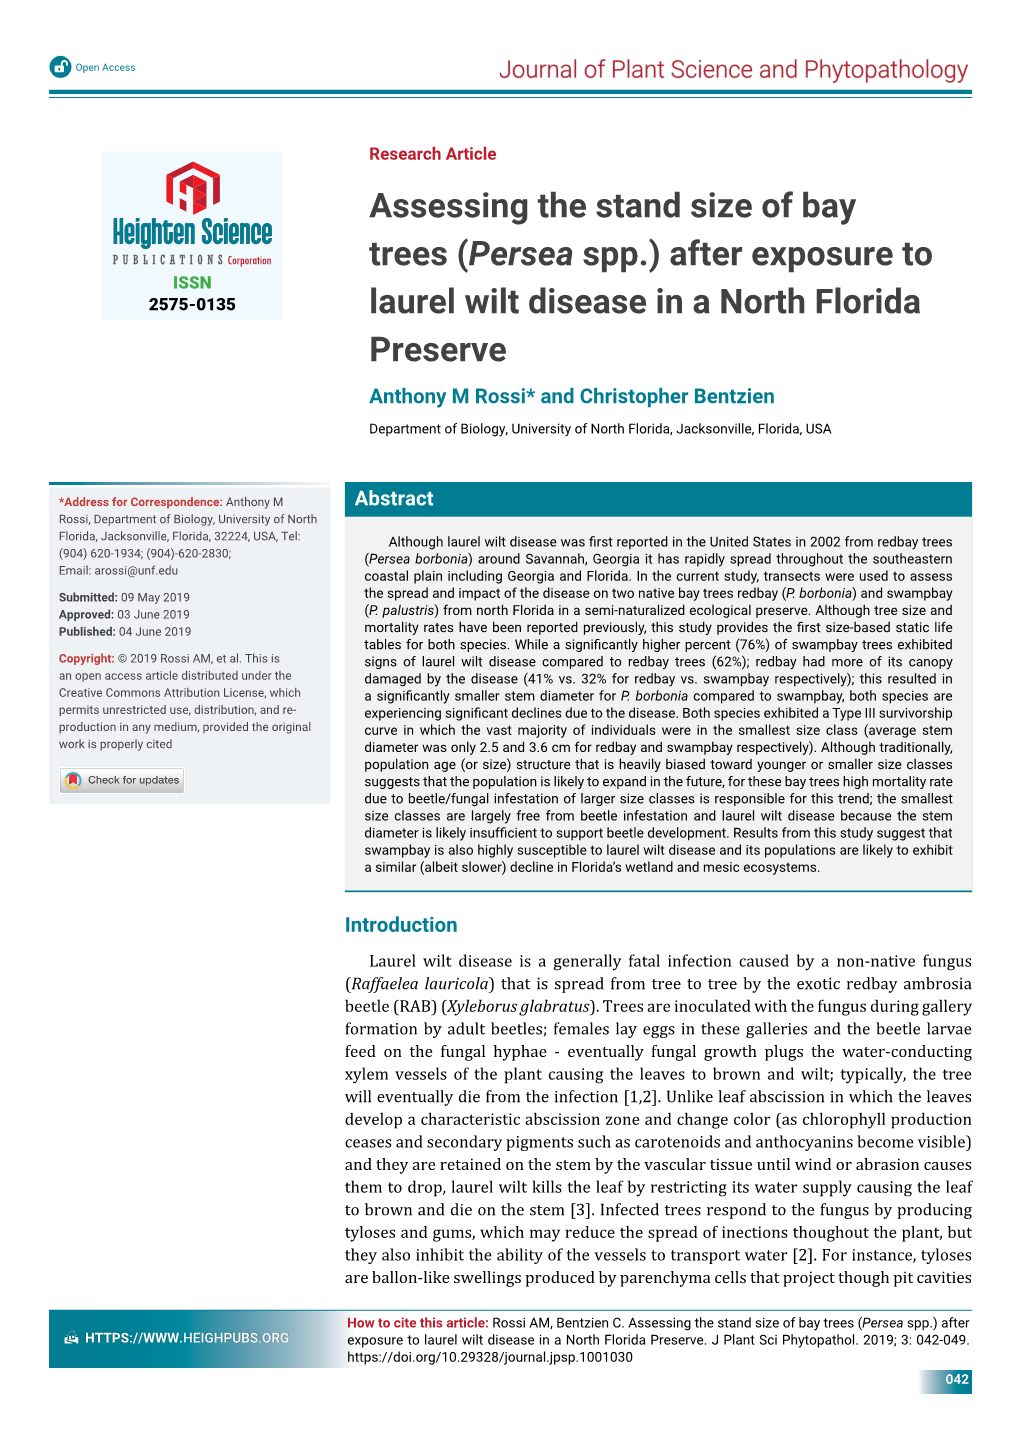 Assessing the Stand Size of Bay Trees (Persea Spp.) After Exposure To